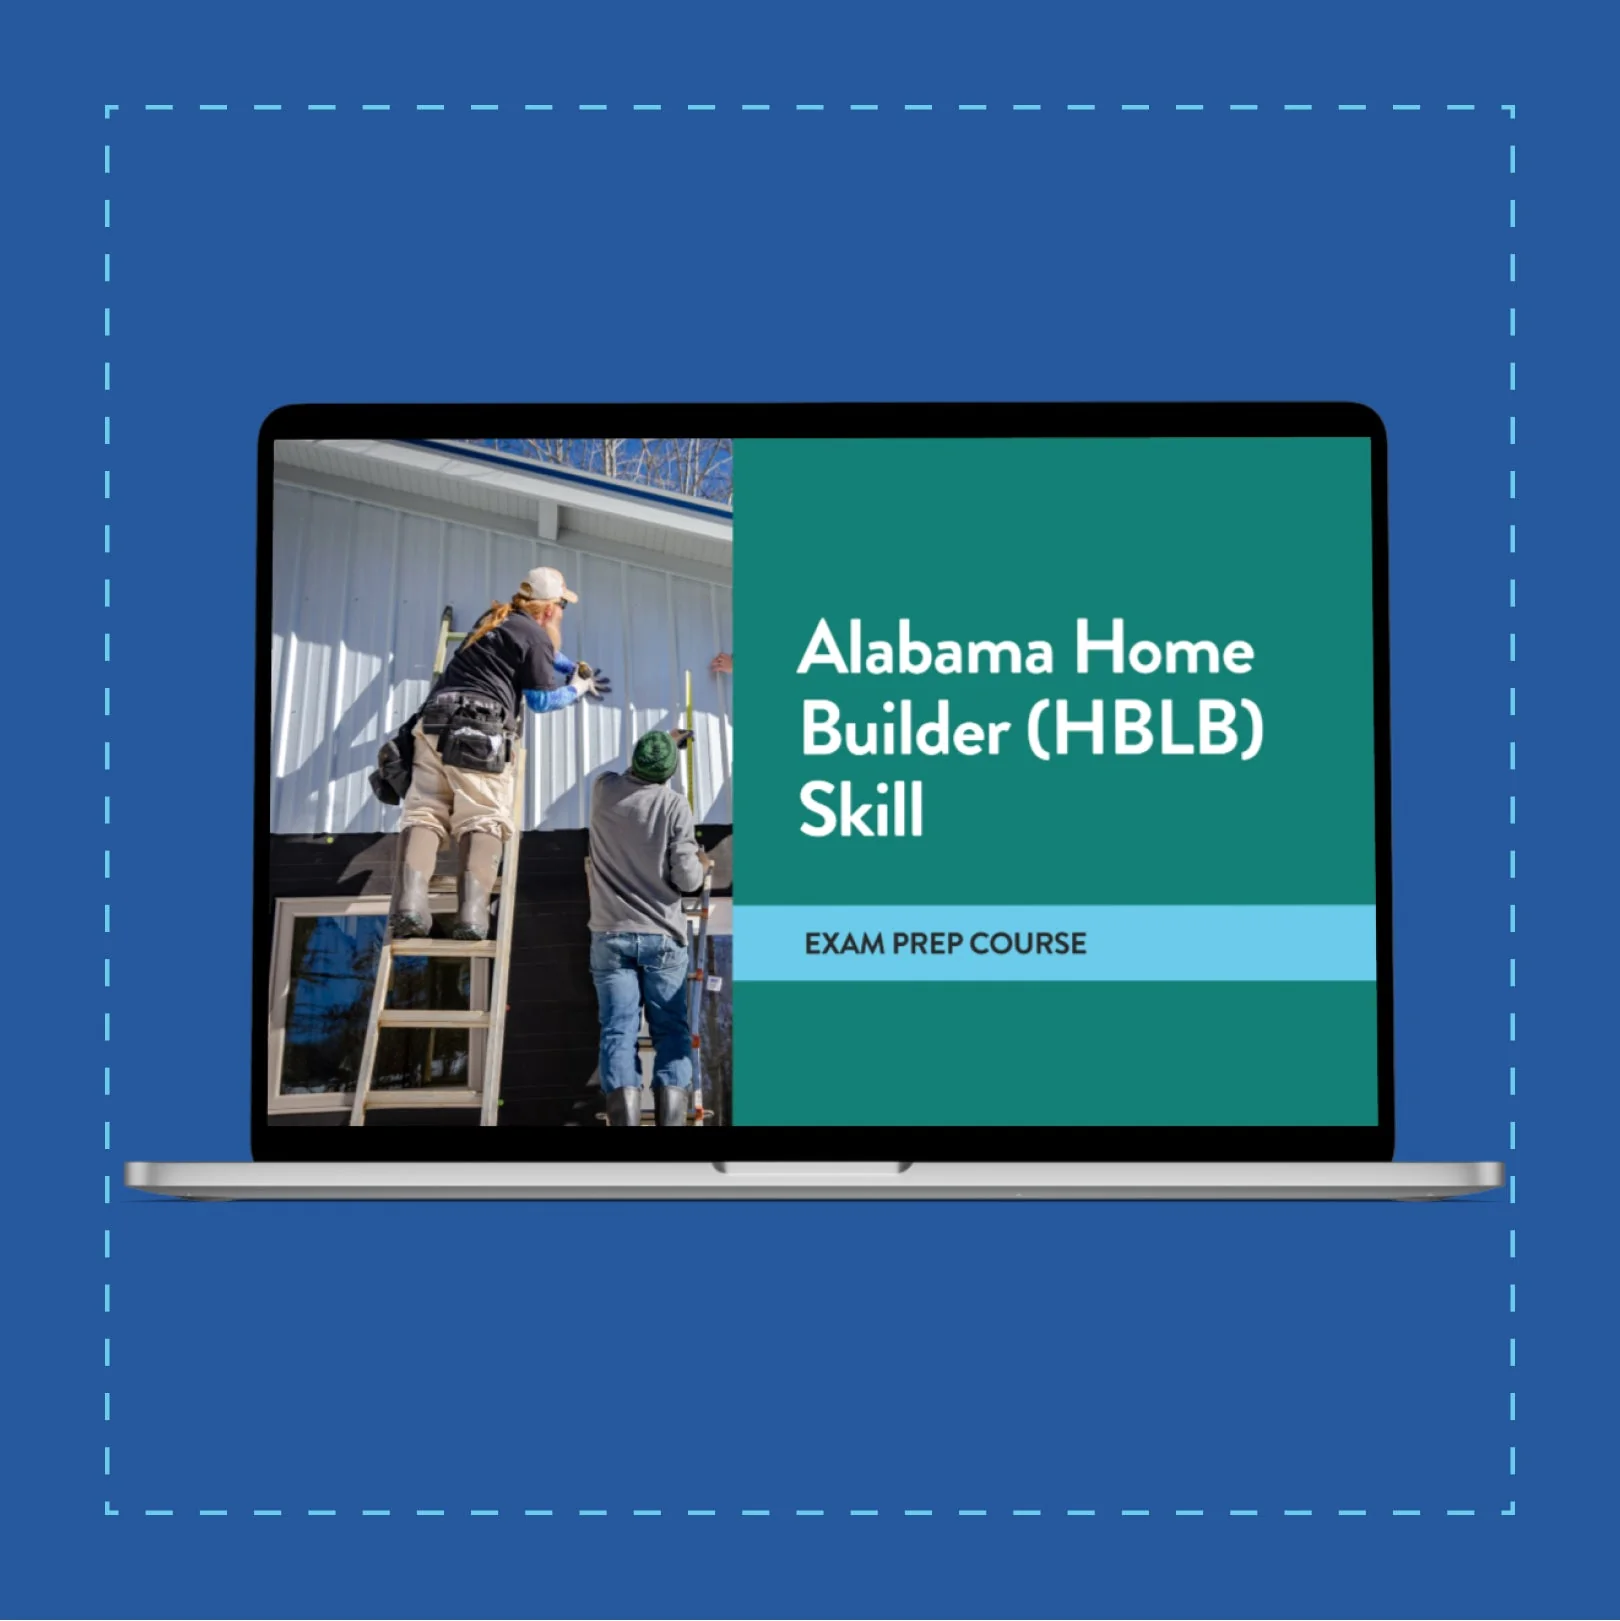 Is there a refresher course for the Alabama Home Builders exam?